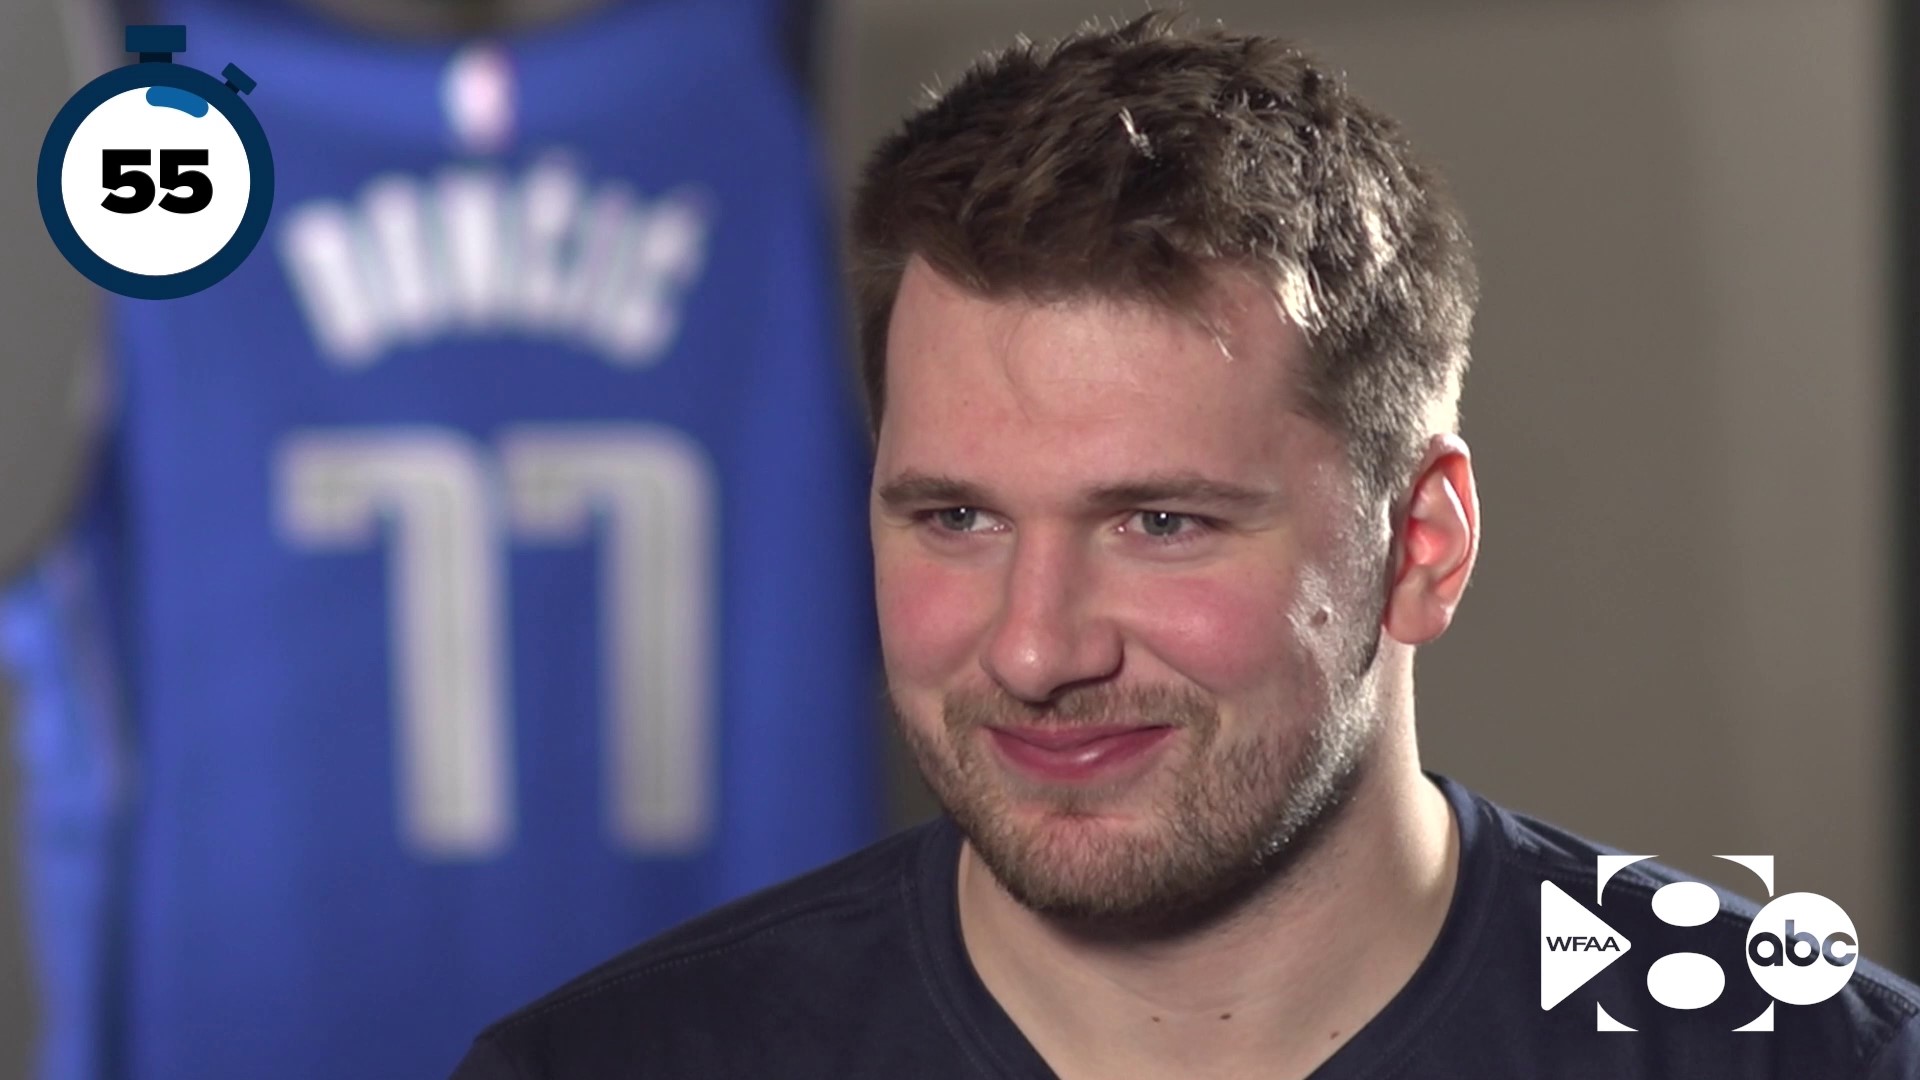 Barbecue or seafood? Favorite restaurant in Dallas? Best advice a coach has given him? We throw some rapid-fire questions at Mavs star Luka Doncic.